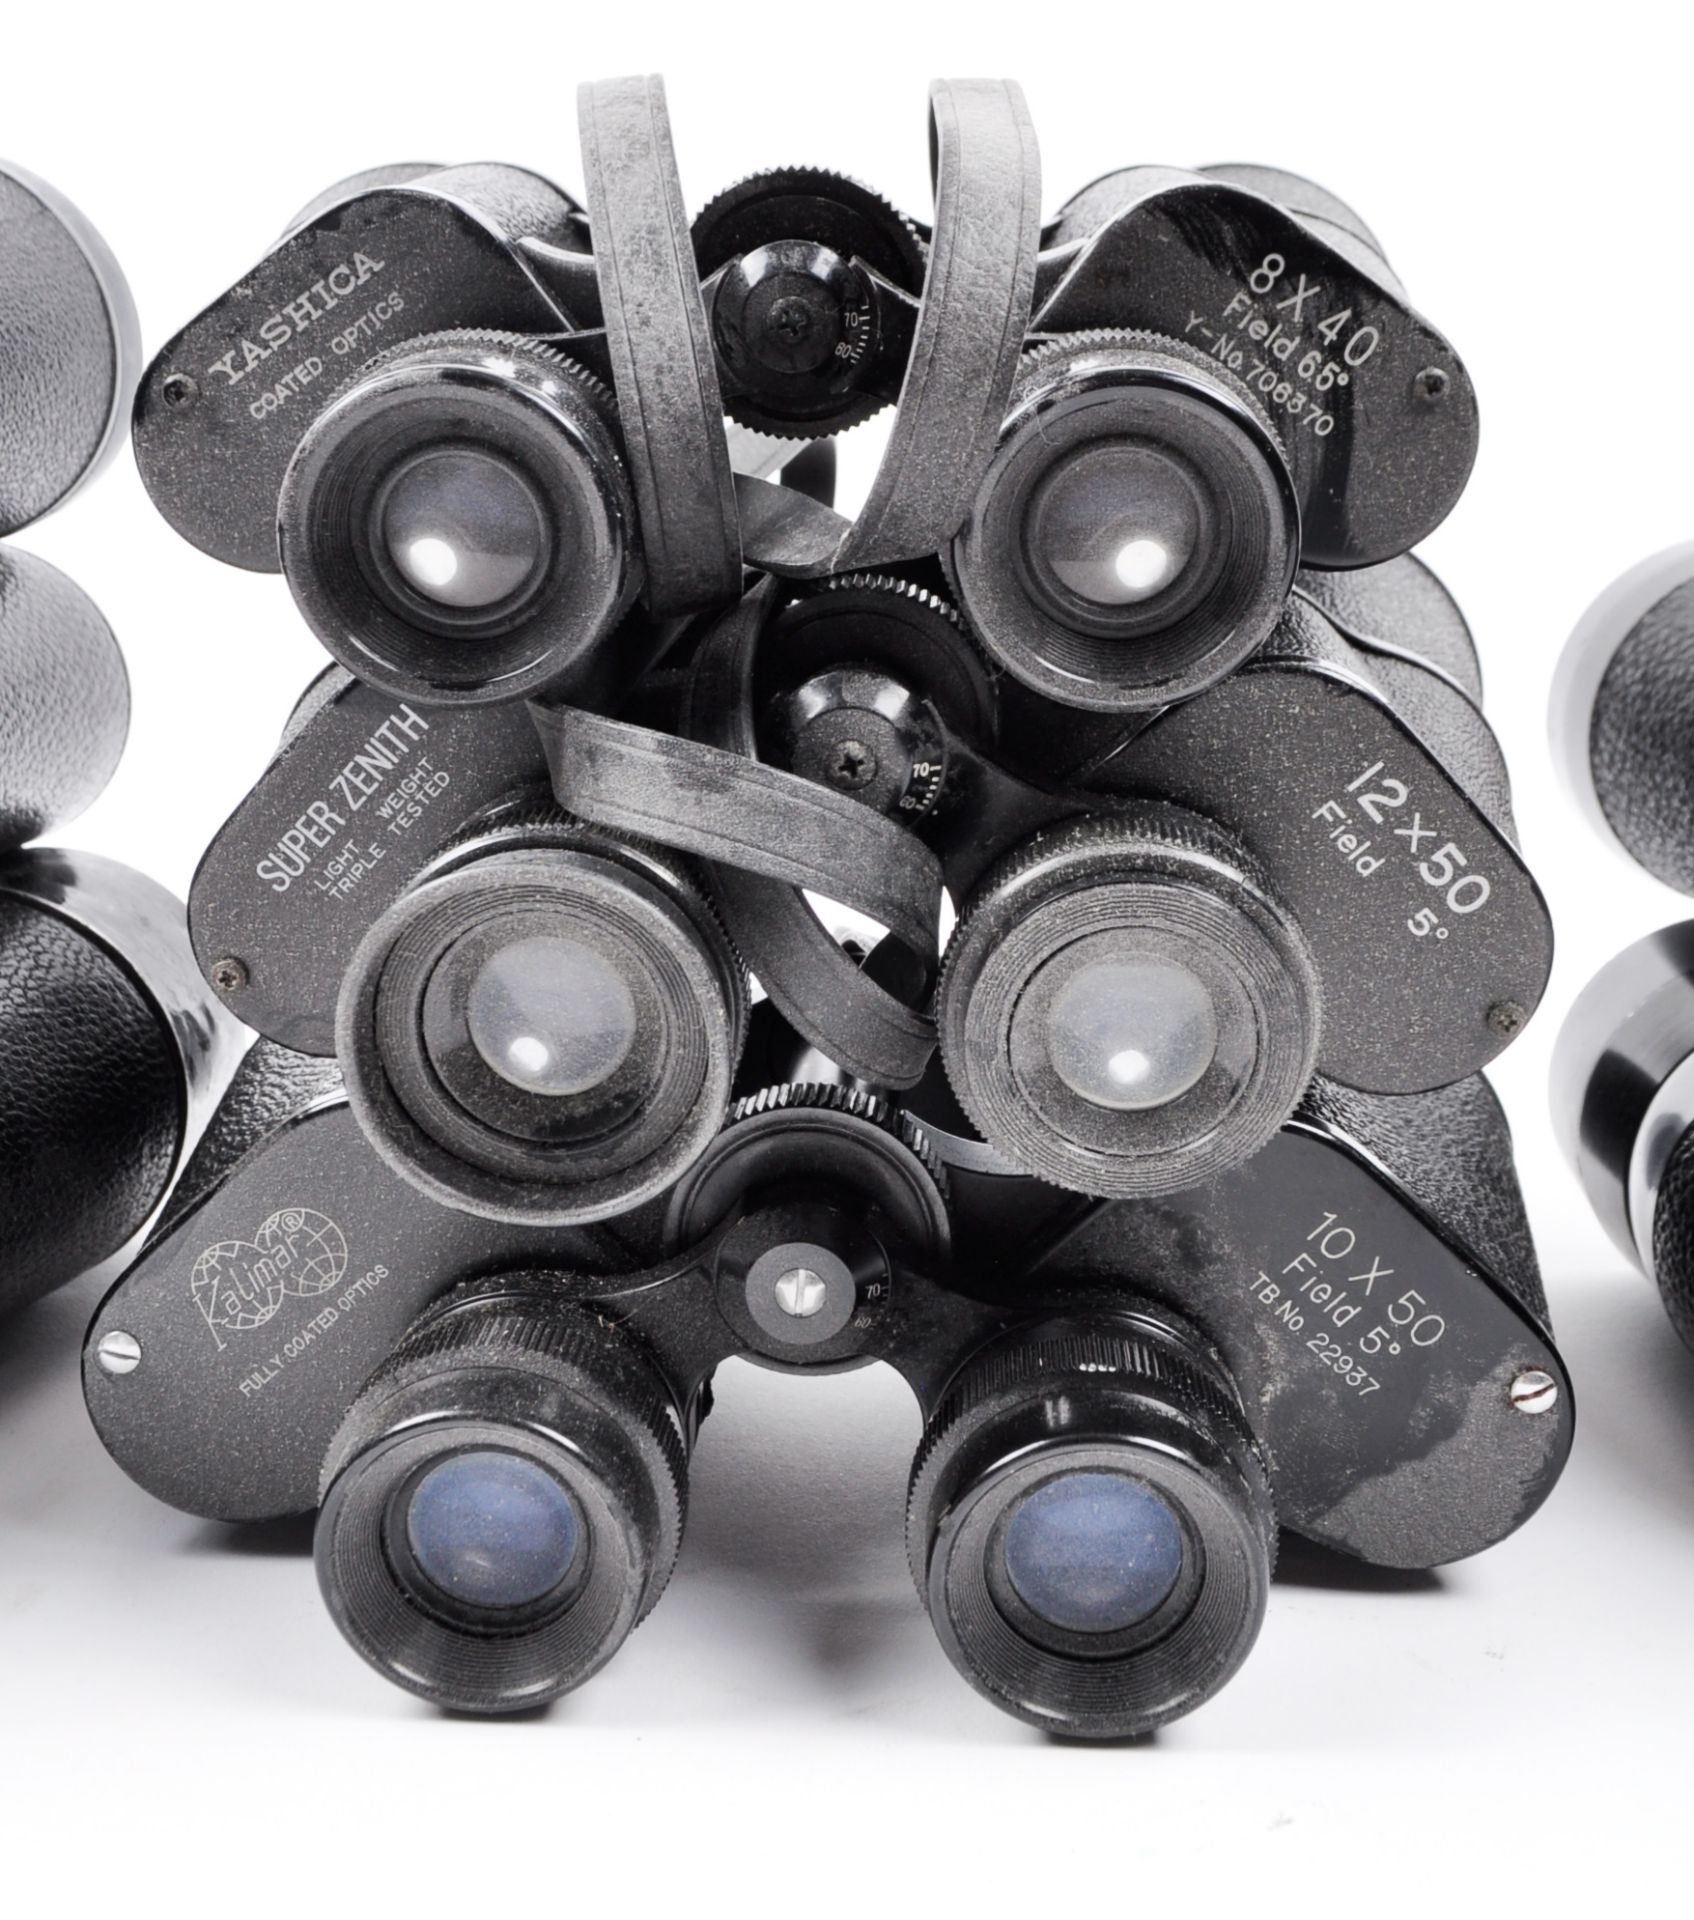 COLLECTION OF ASSORTED VINTAGE BINOCULARS - Image 4 of 5